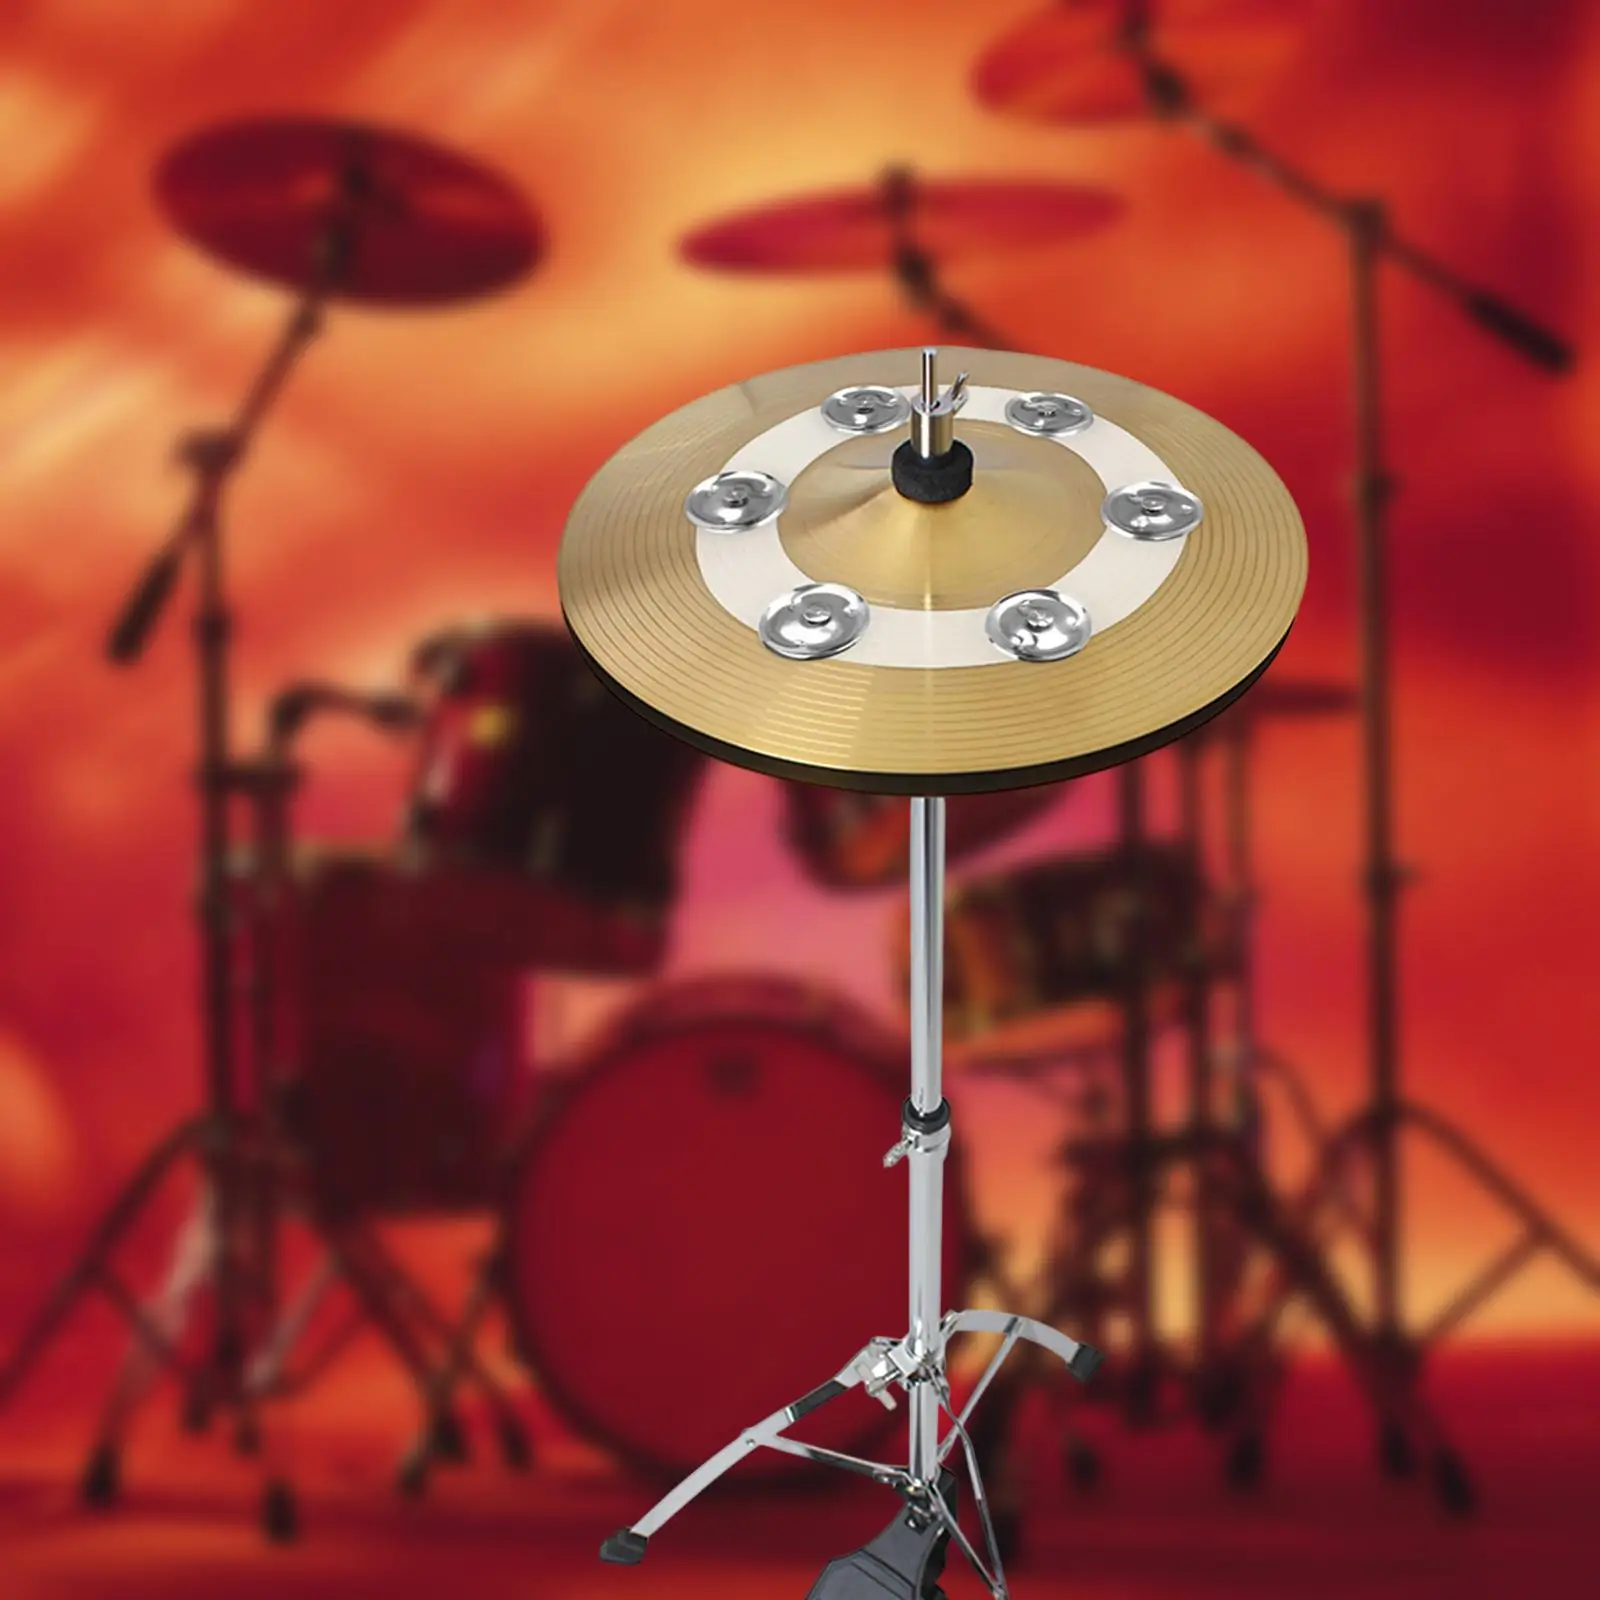 Cymbal Rings with Single Row Accessory Drum Set Performance Cymbal Tambourine